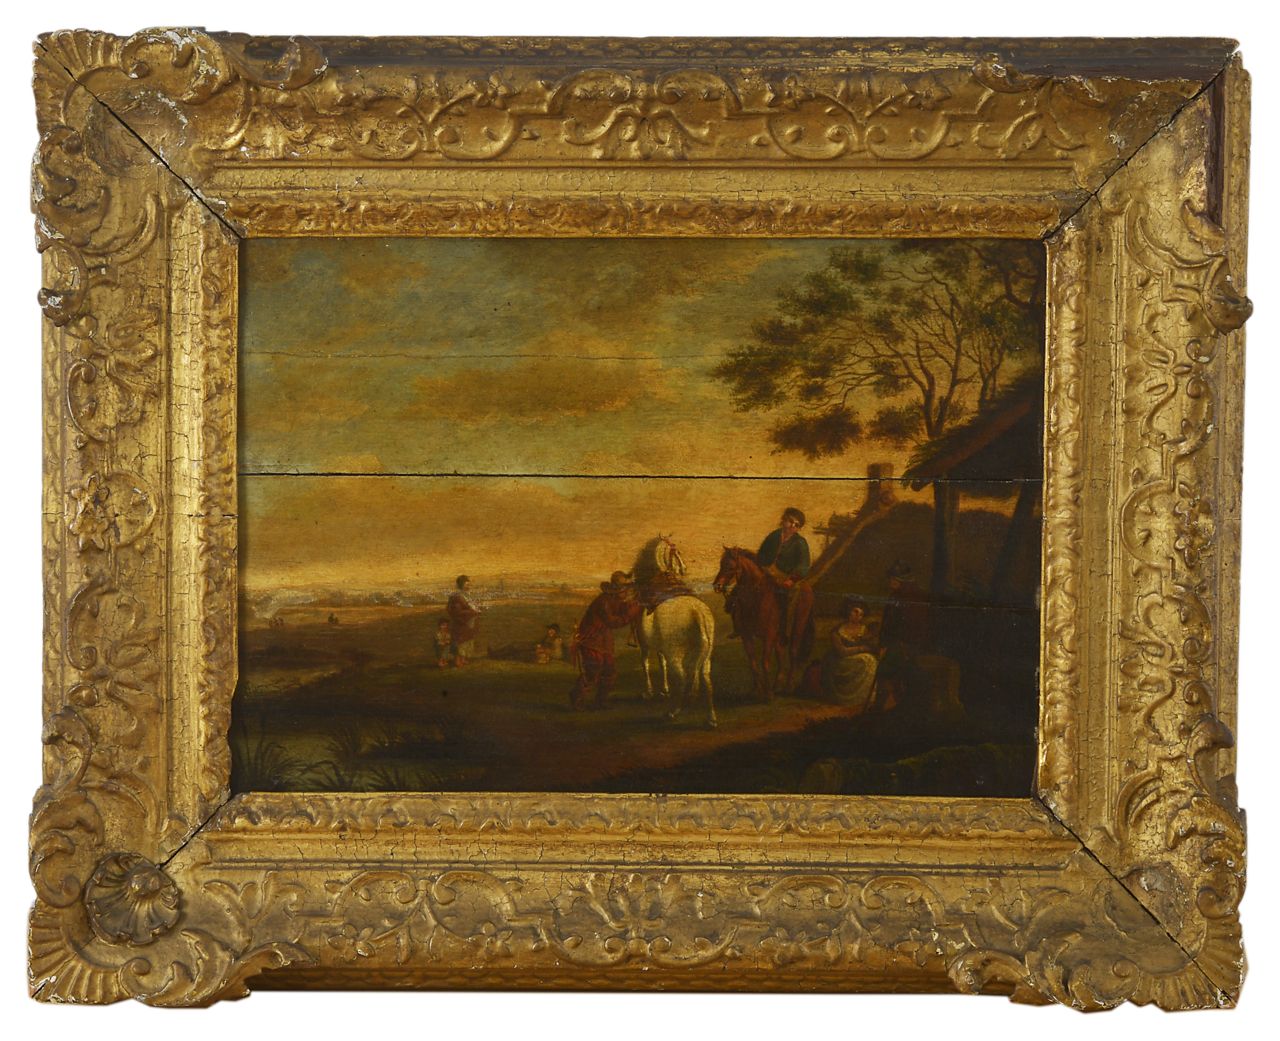 Late 18th century/early 19th century Continental School A country landscape with figures on horseba